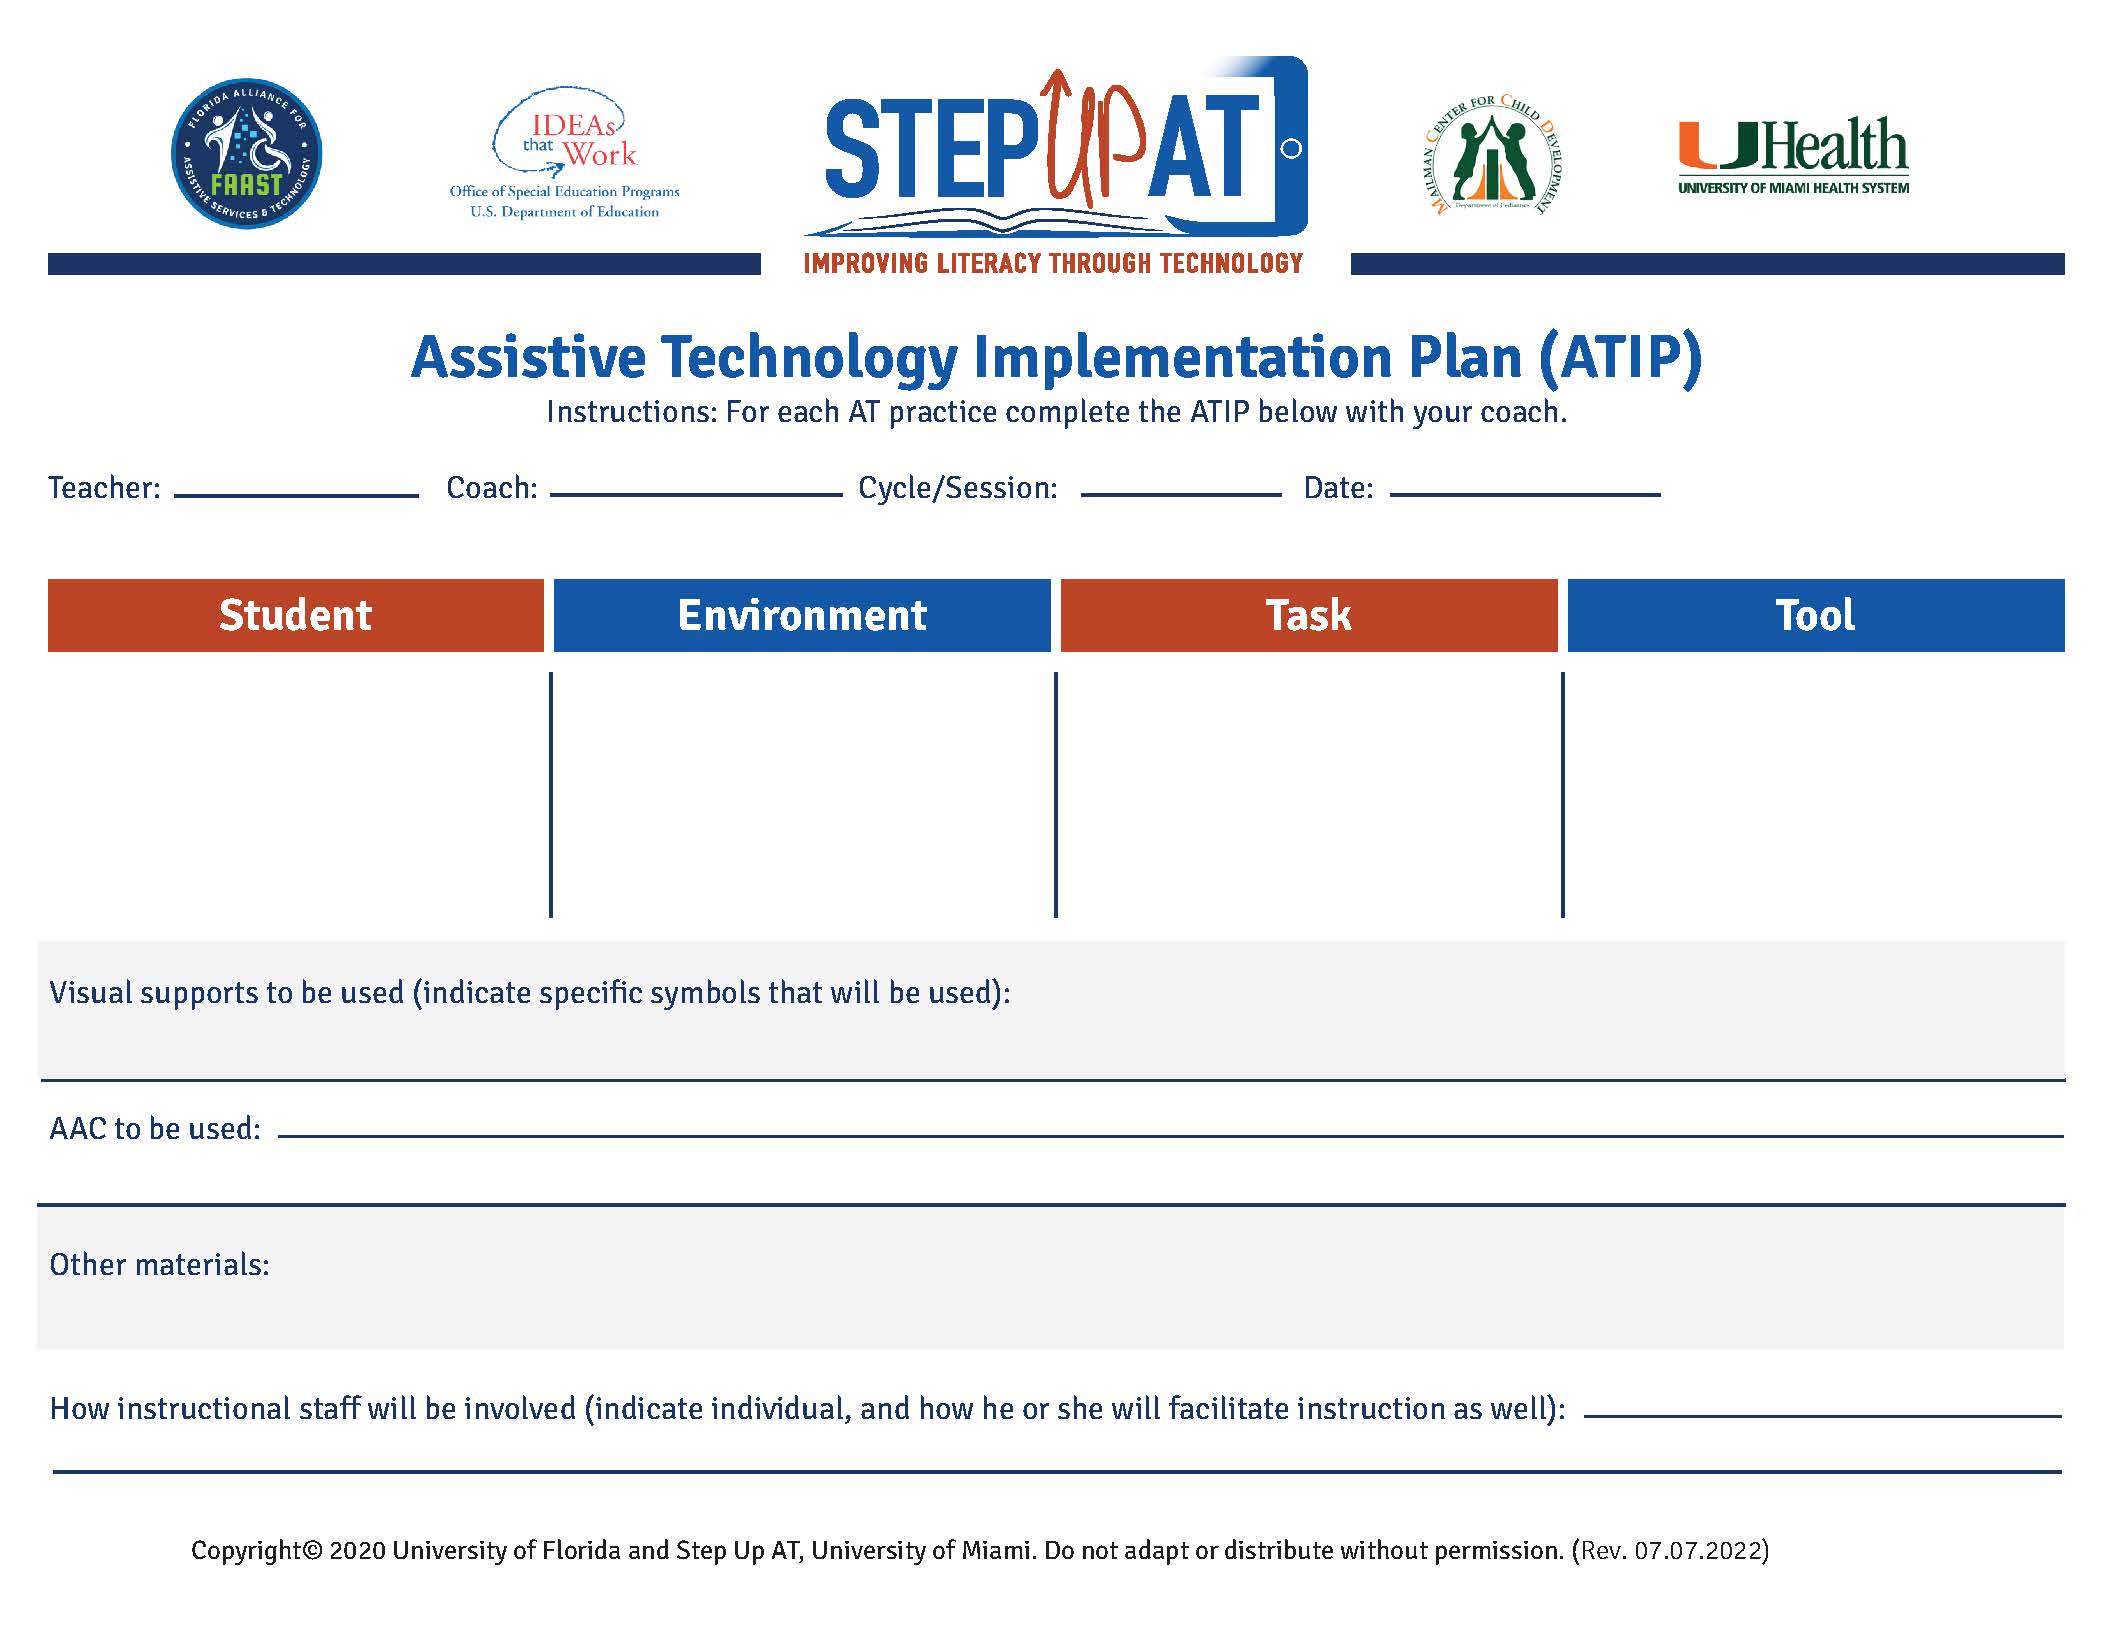 Step Up AT Assistive Technology Implementation Plan (ATIP)